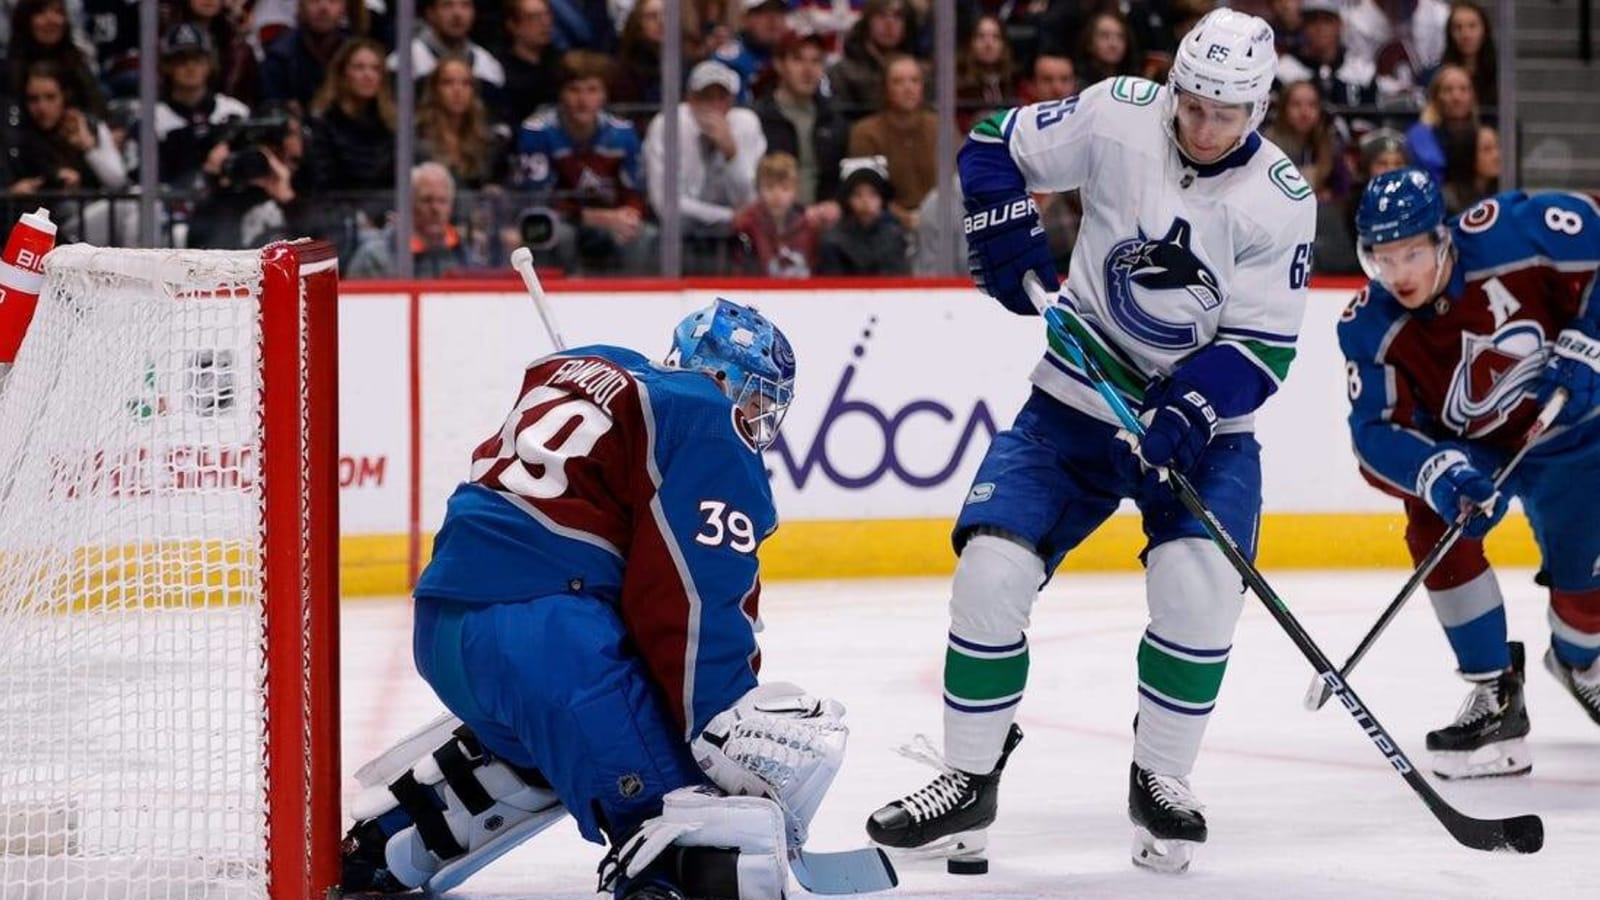 Canucks rally in third period to top Avalanche